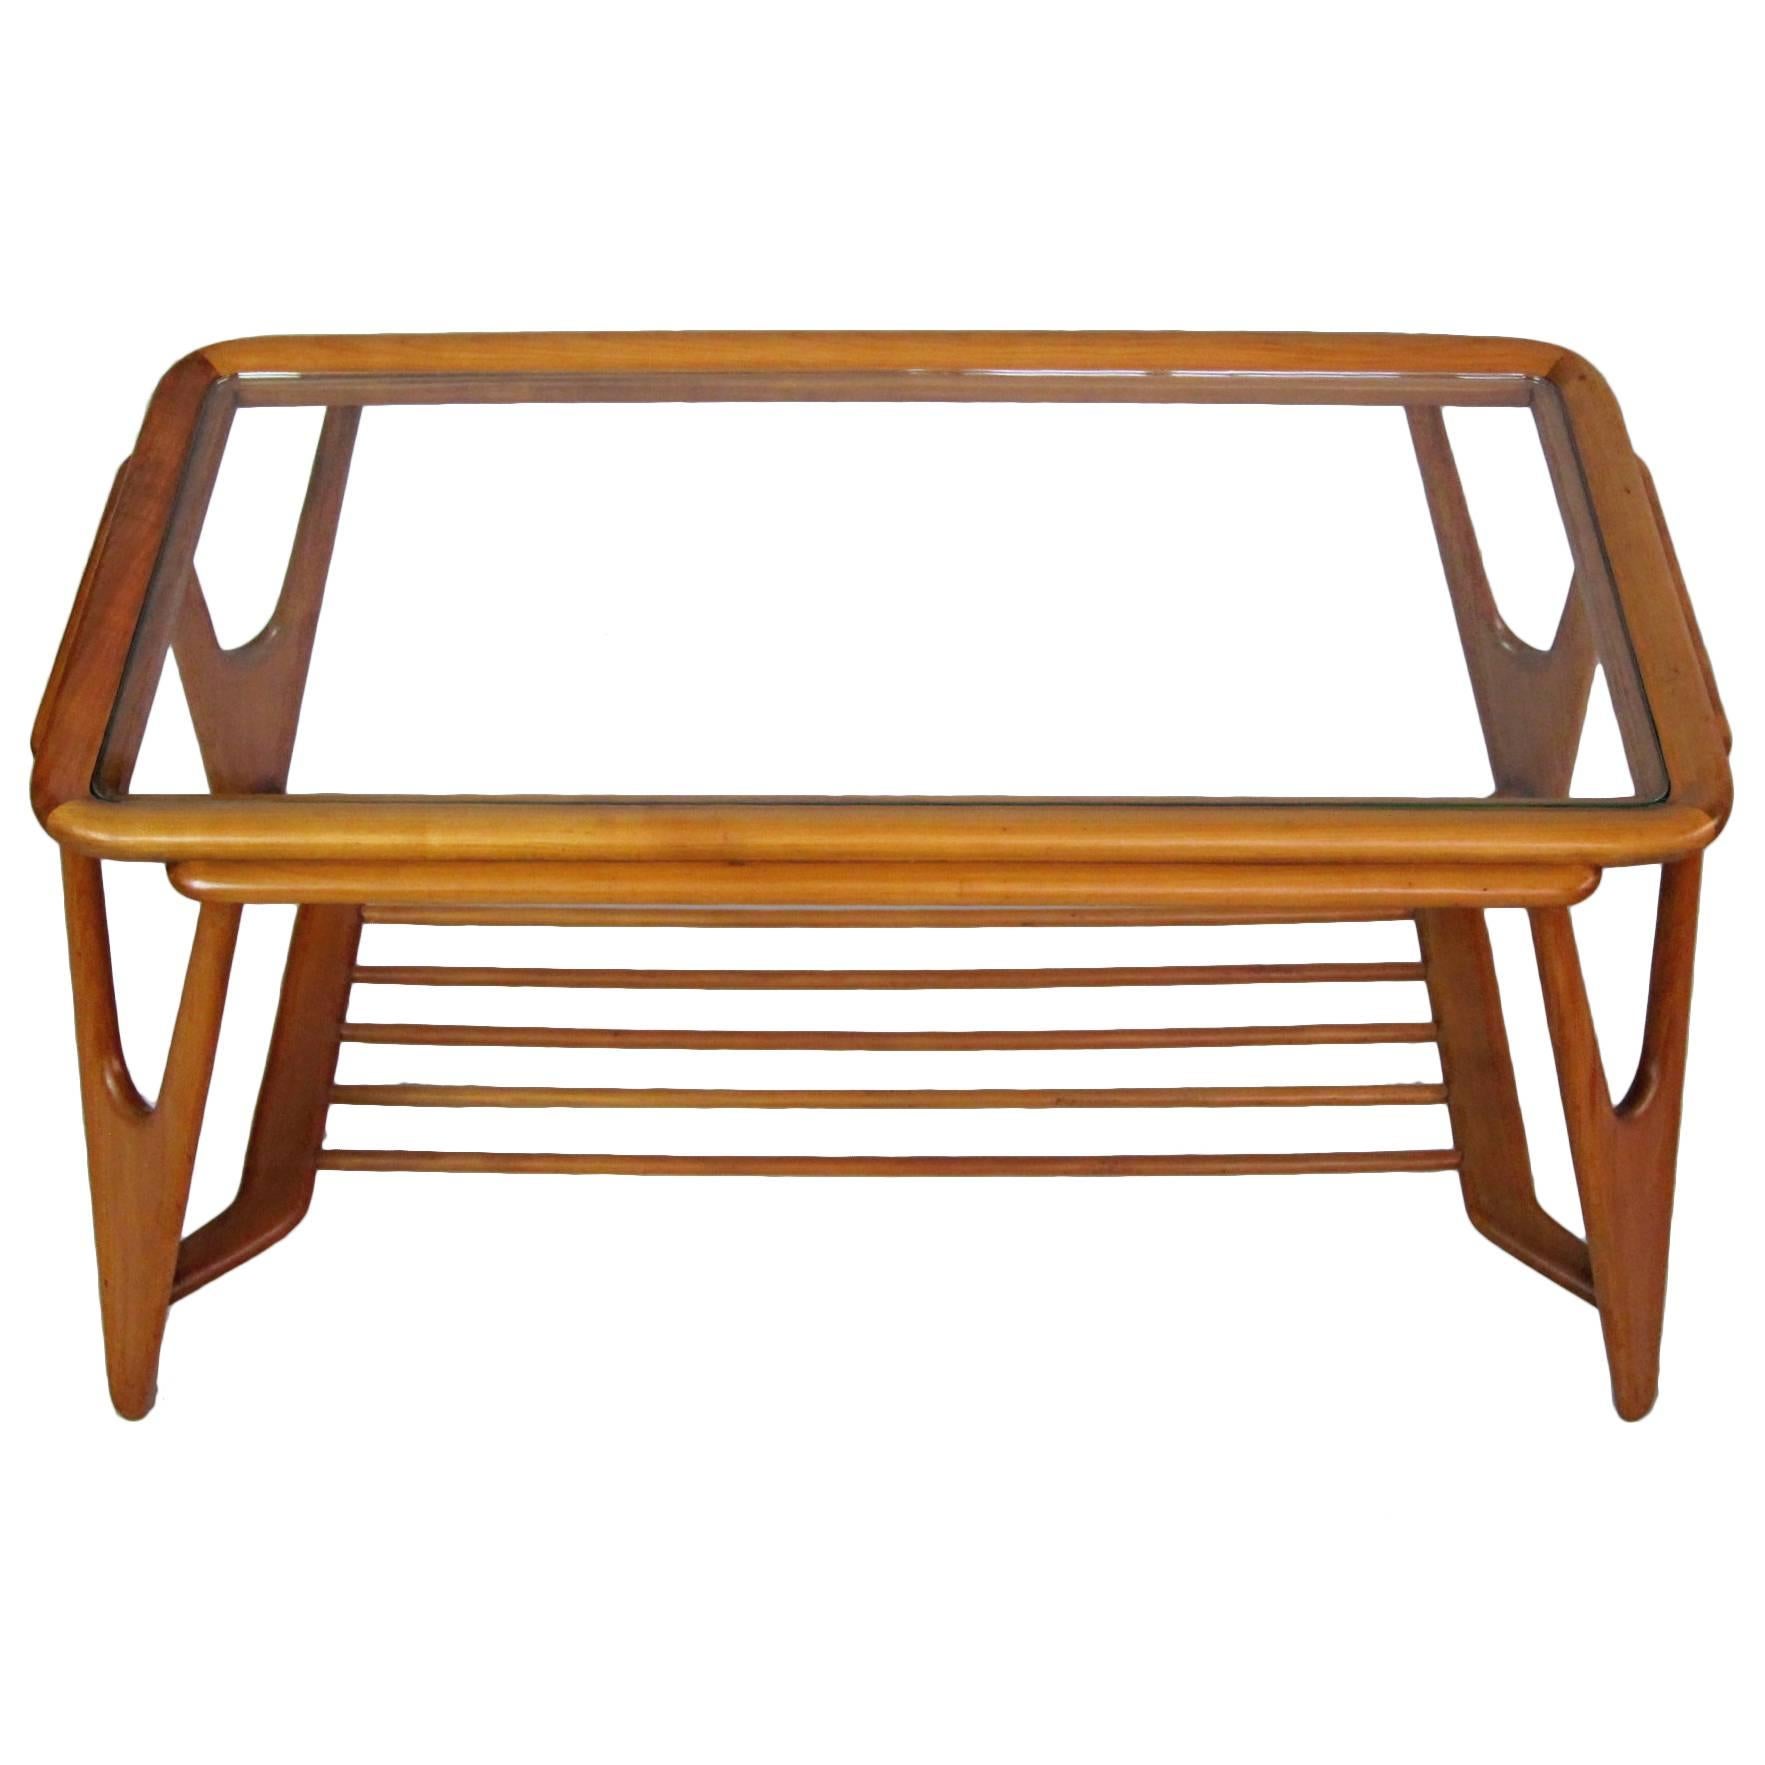 Exceptional Organic Coffeetable, Italy, 1950s For Sale